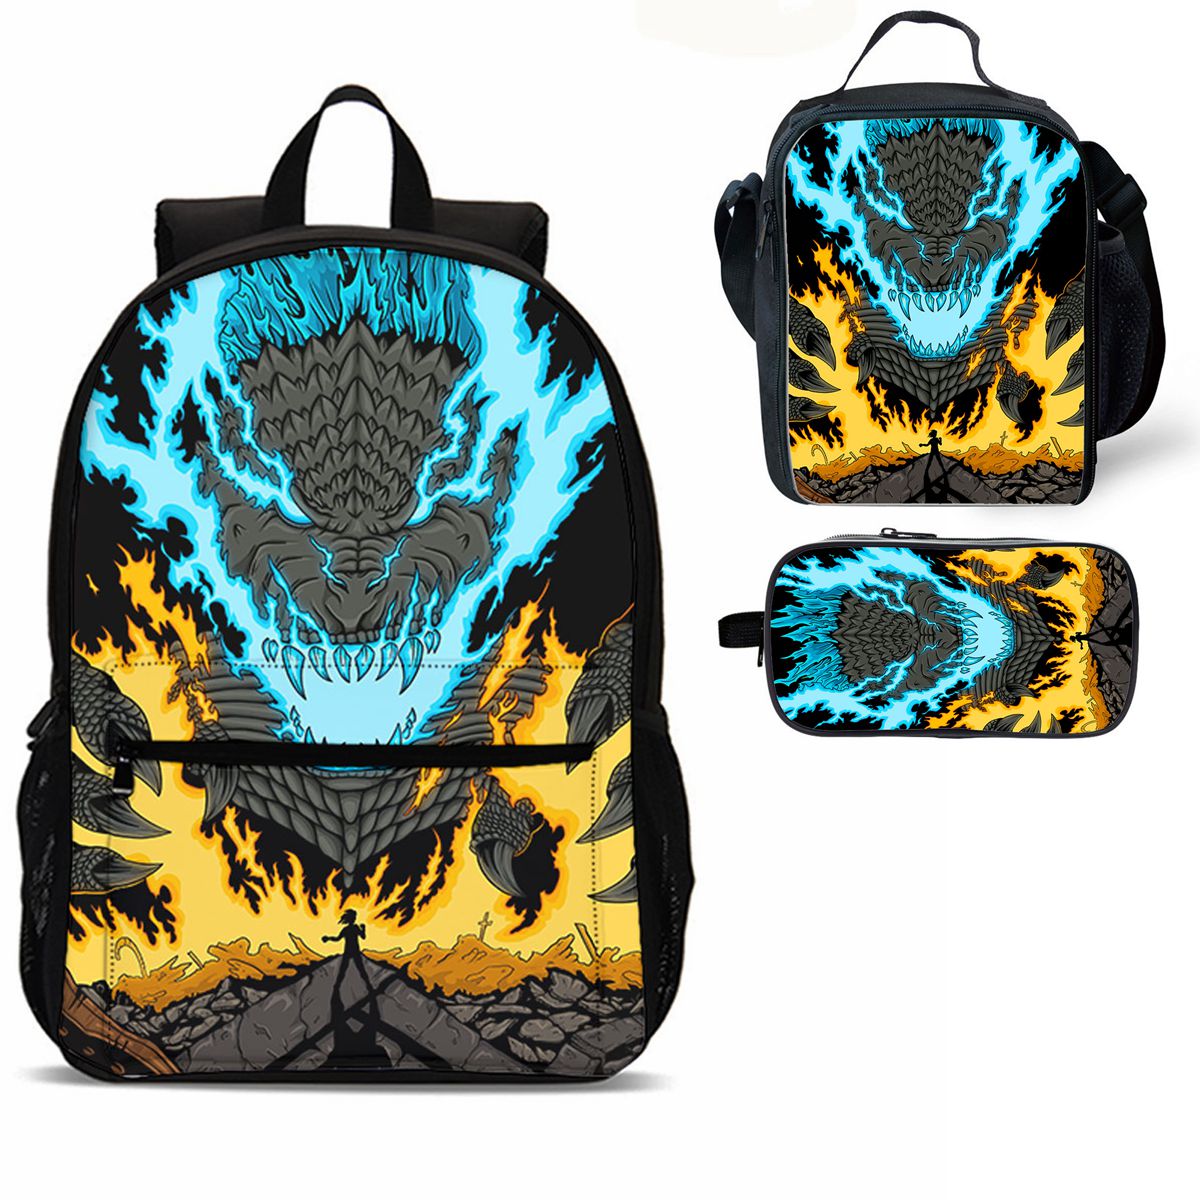 Godzilla 3 Pieces Combo 18 inches School Backpack Lunch Bag Pencil Case